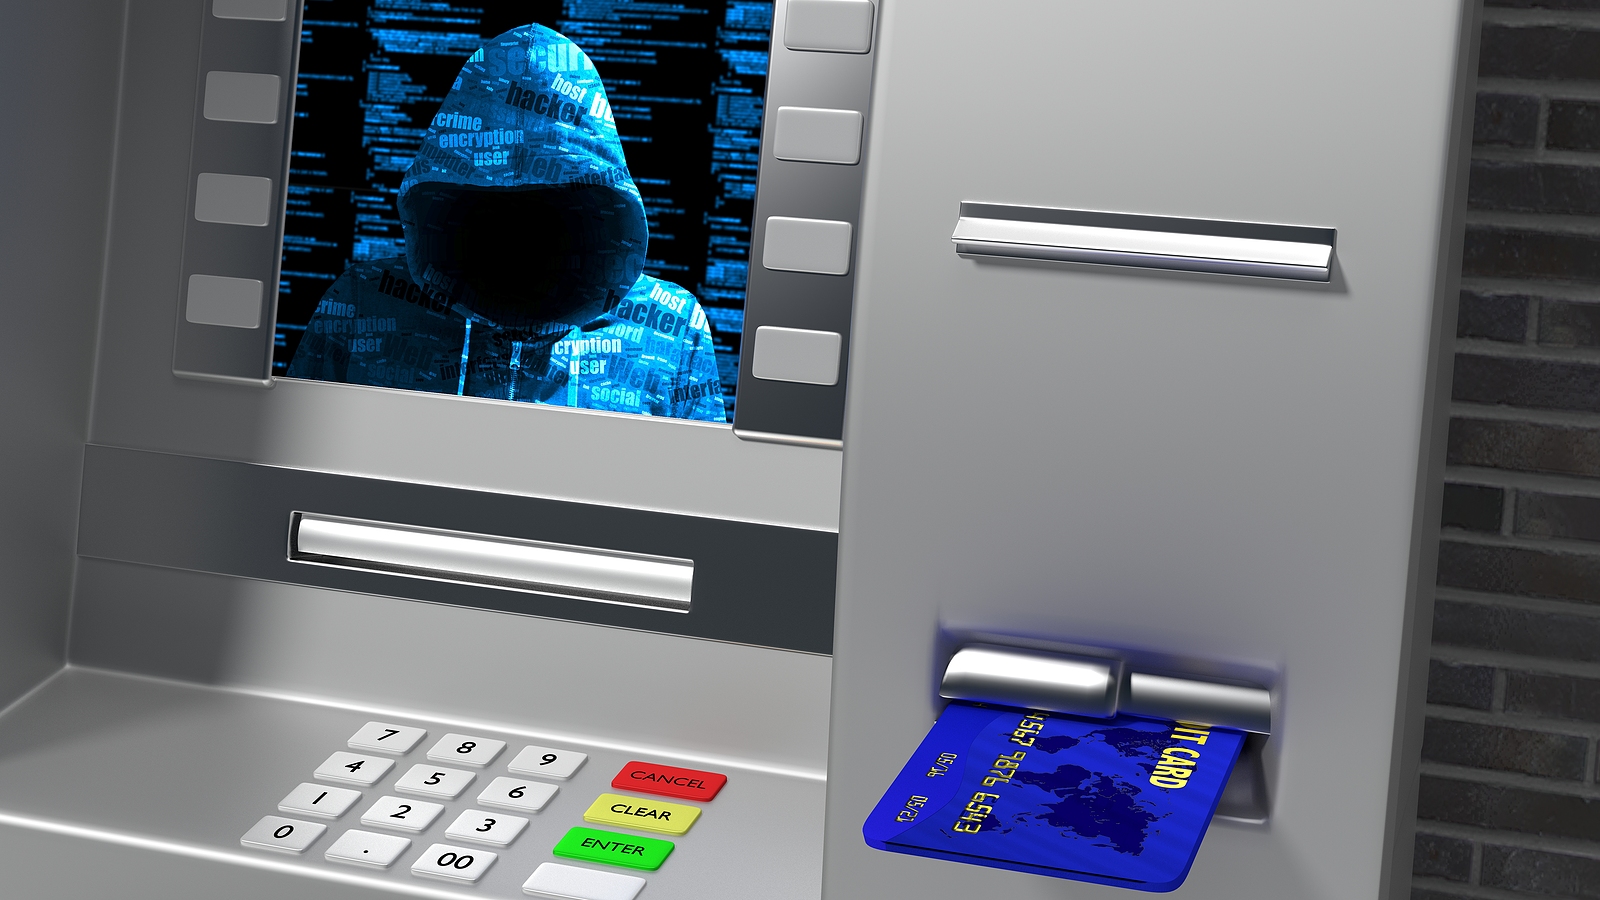 iagona-scrutisweb-vulnerabilities-could-expose-atms-to-remote-hacking